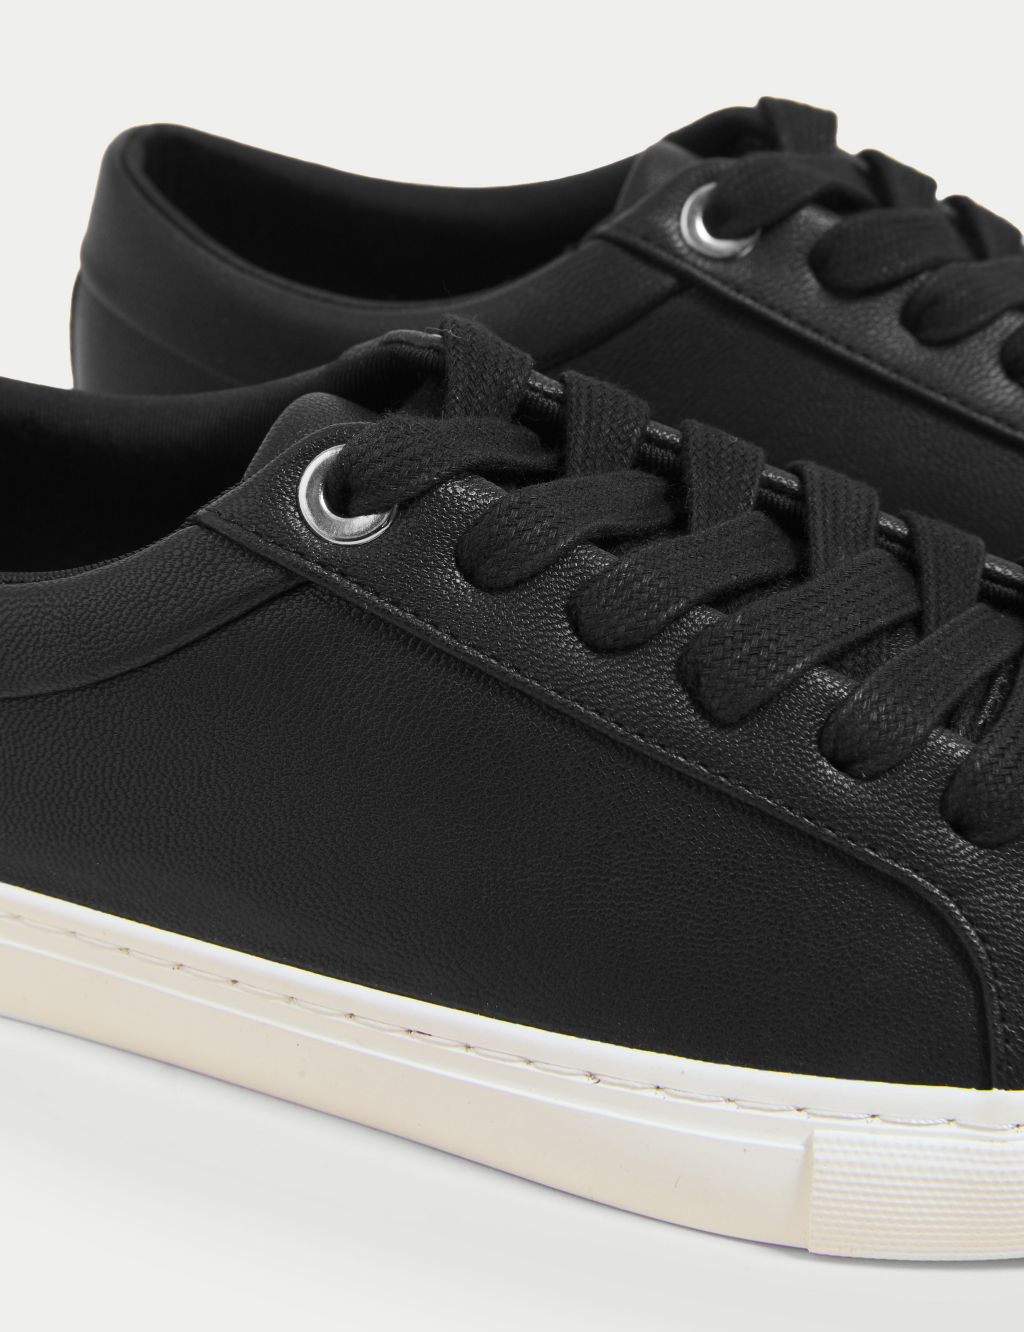 Lace Up Eyelet Detail Trainers image 3